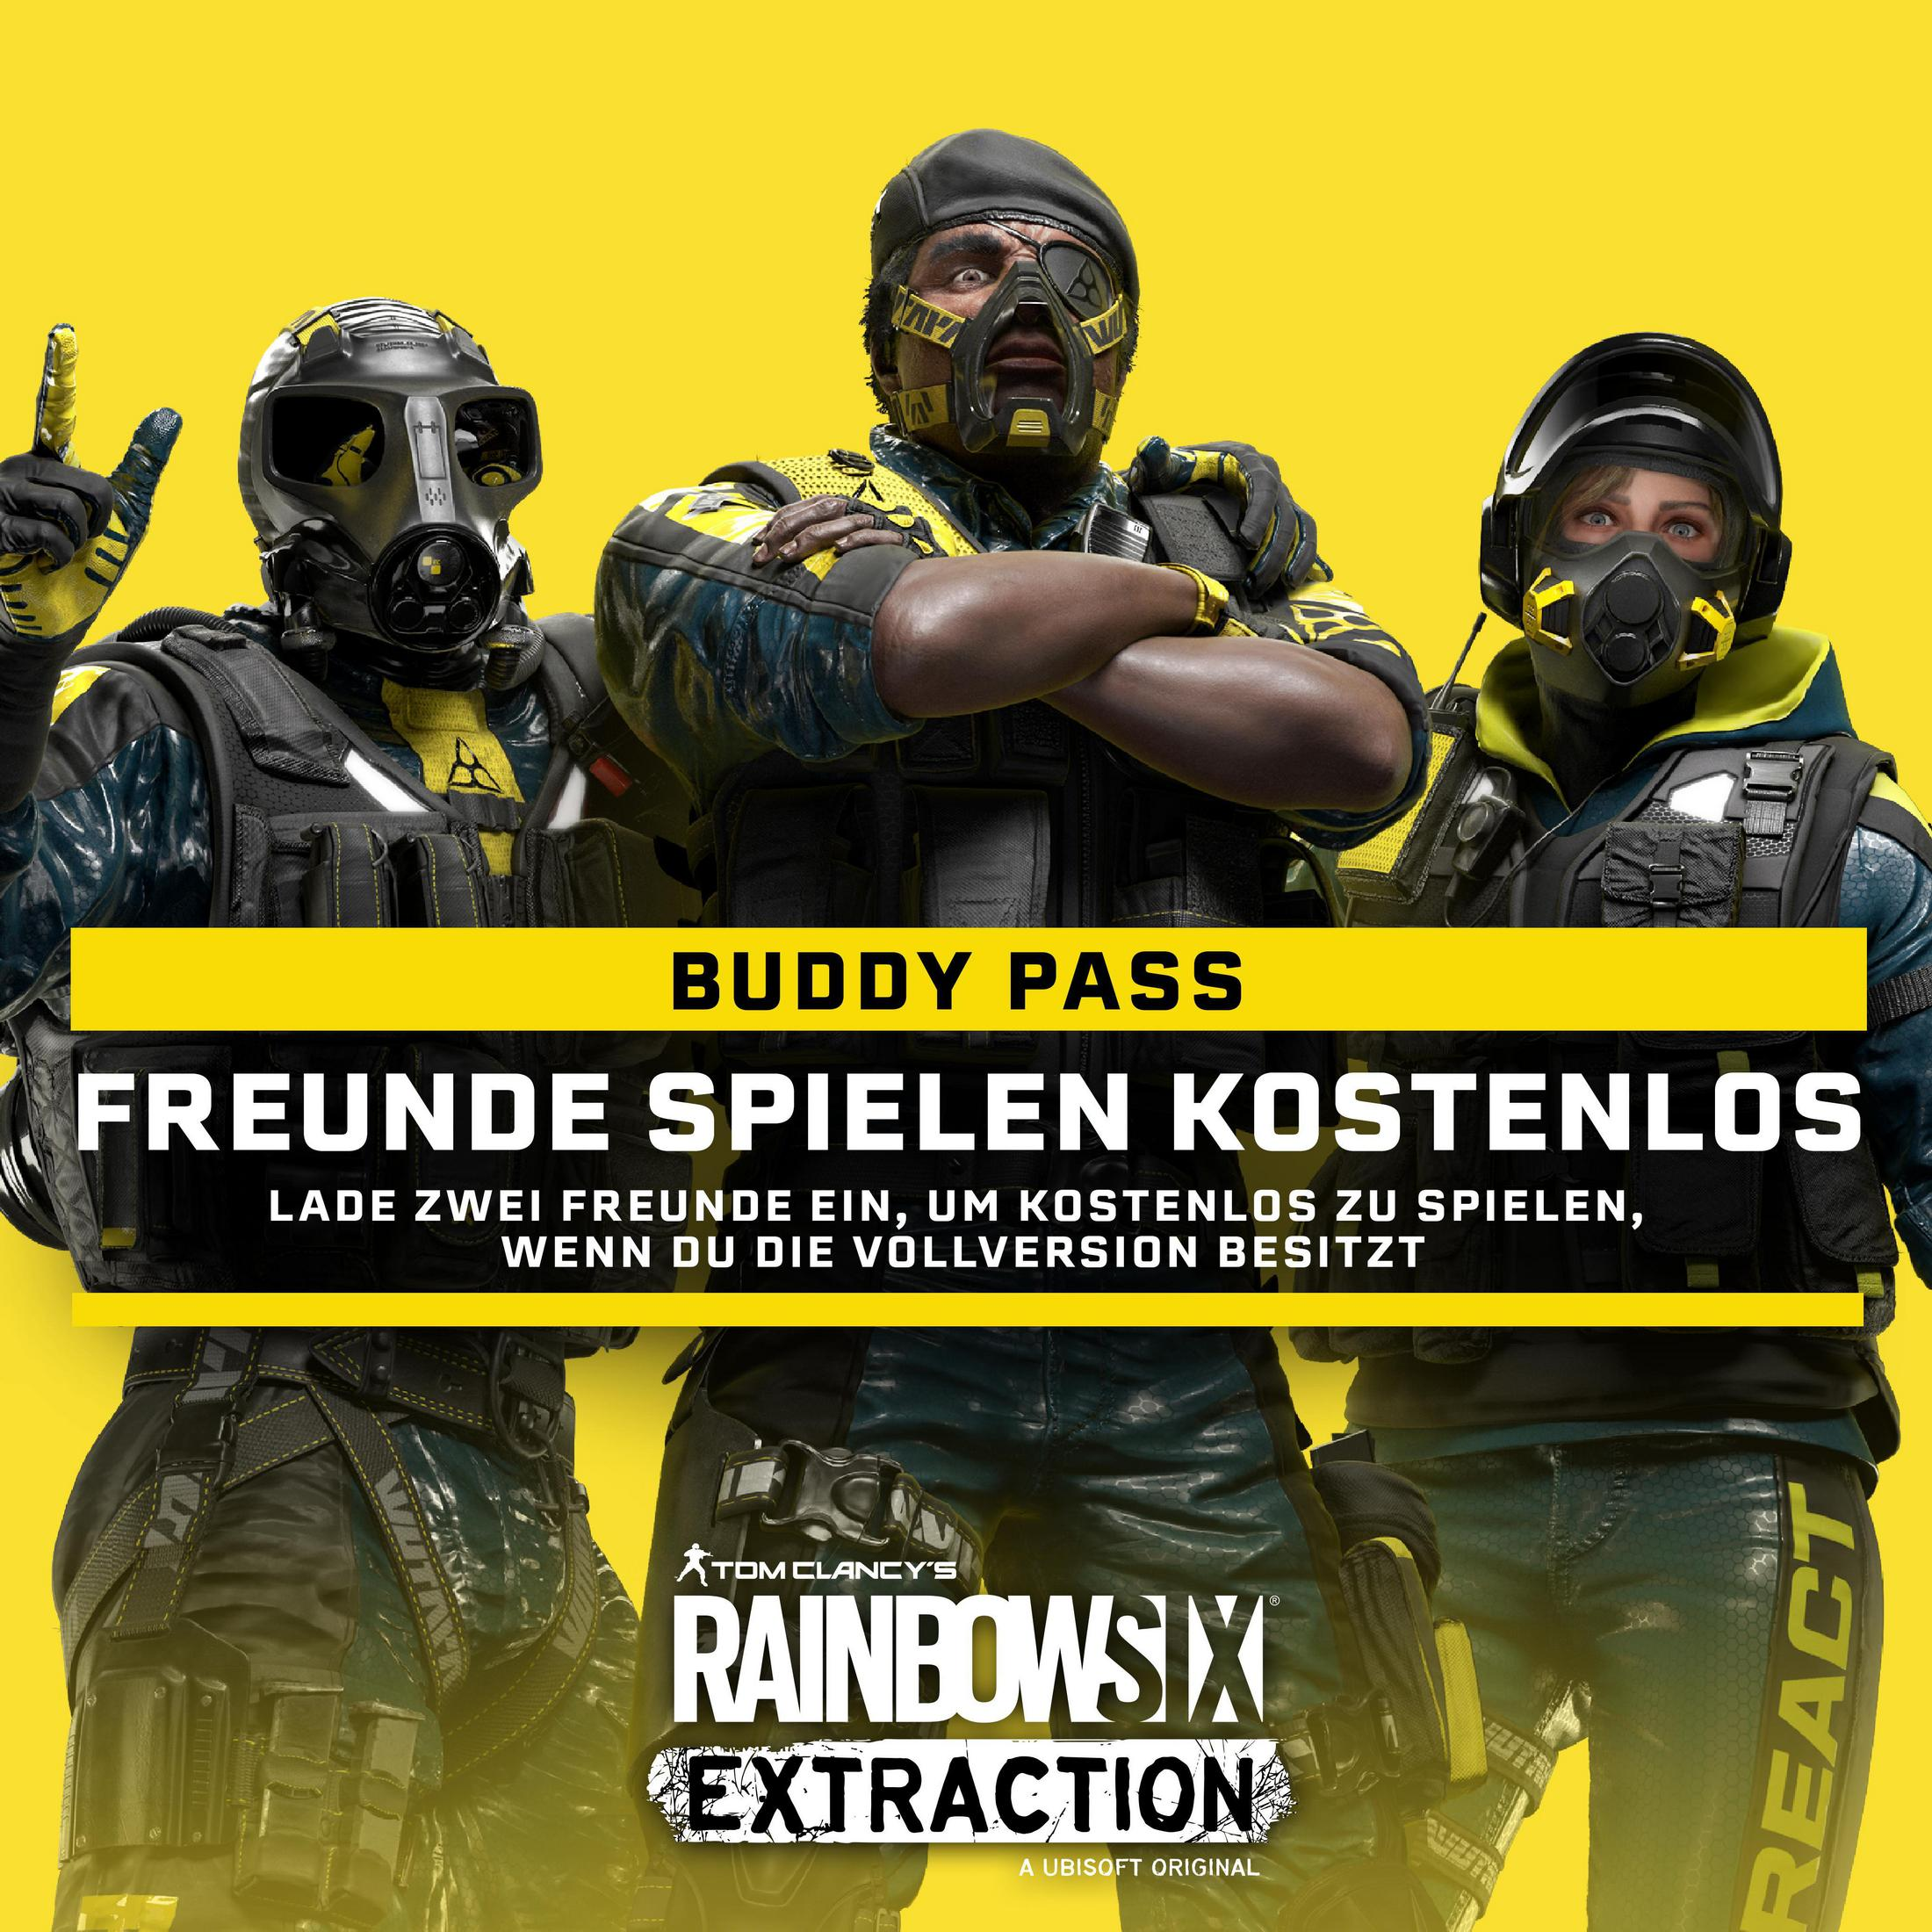 Rainbow Six Extractions PS-5 [PlayStation Edition 5] Deluxe 